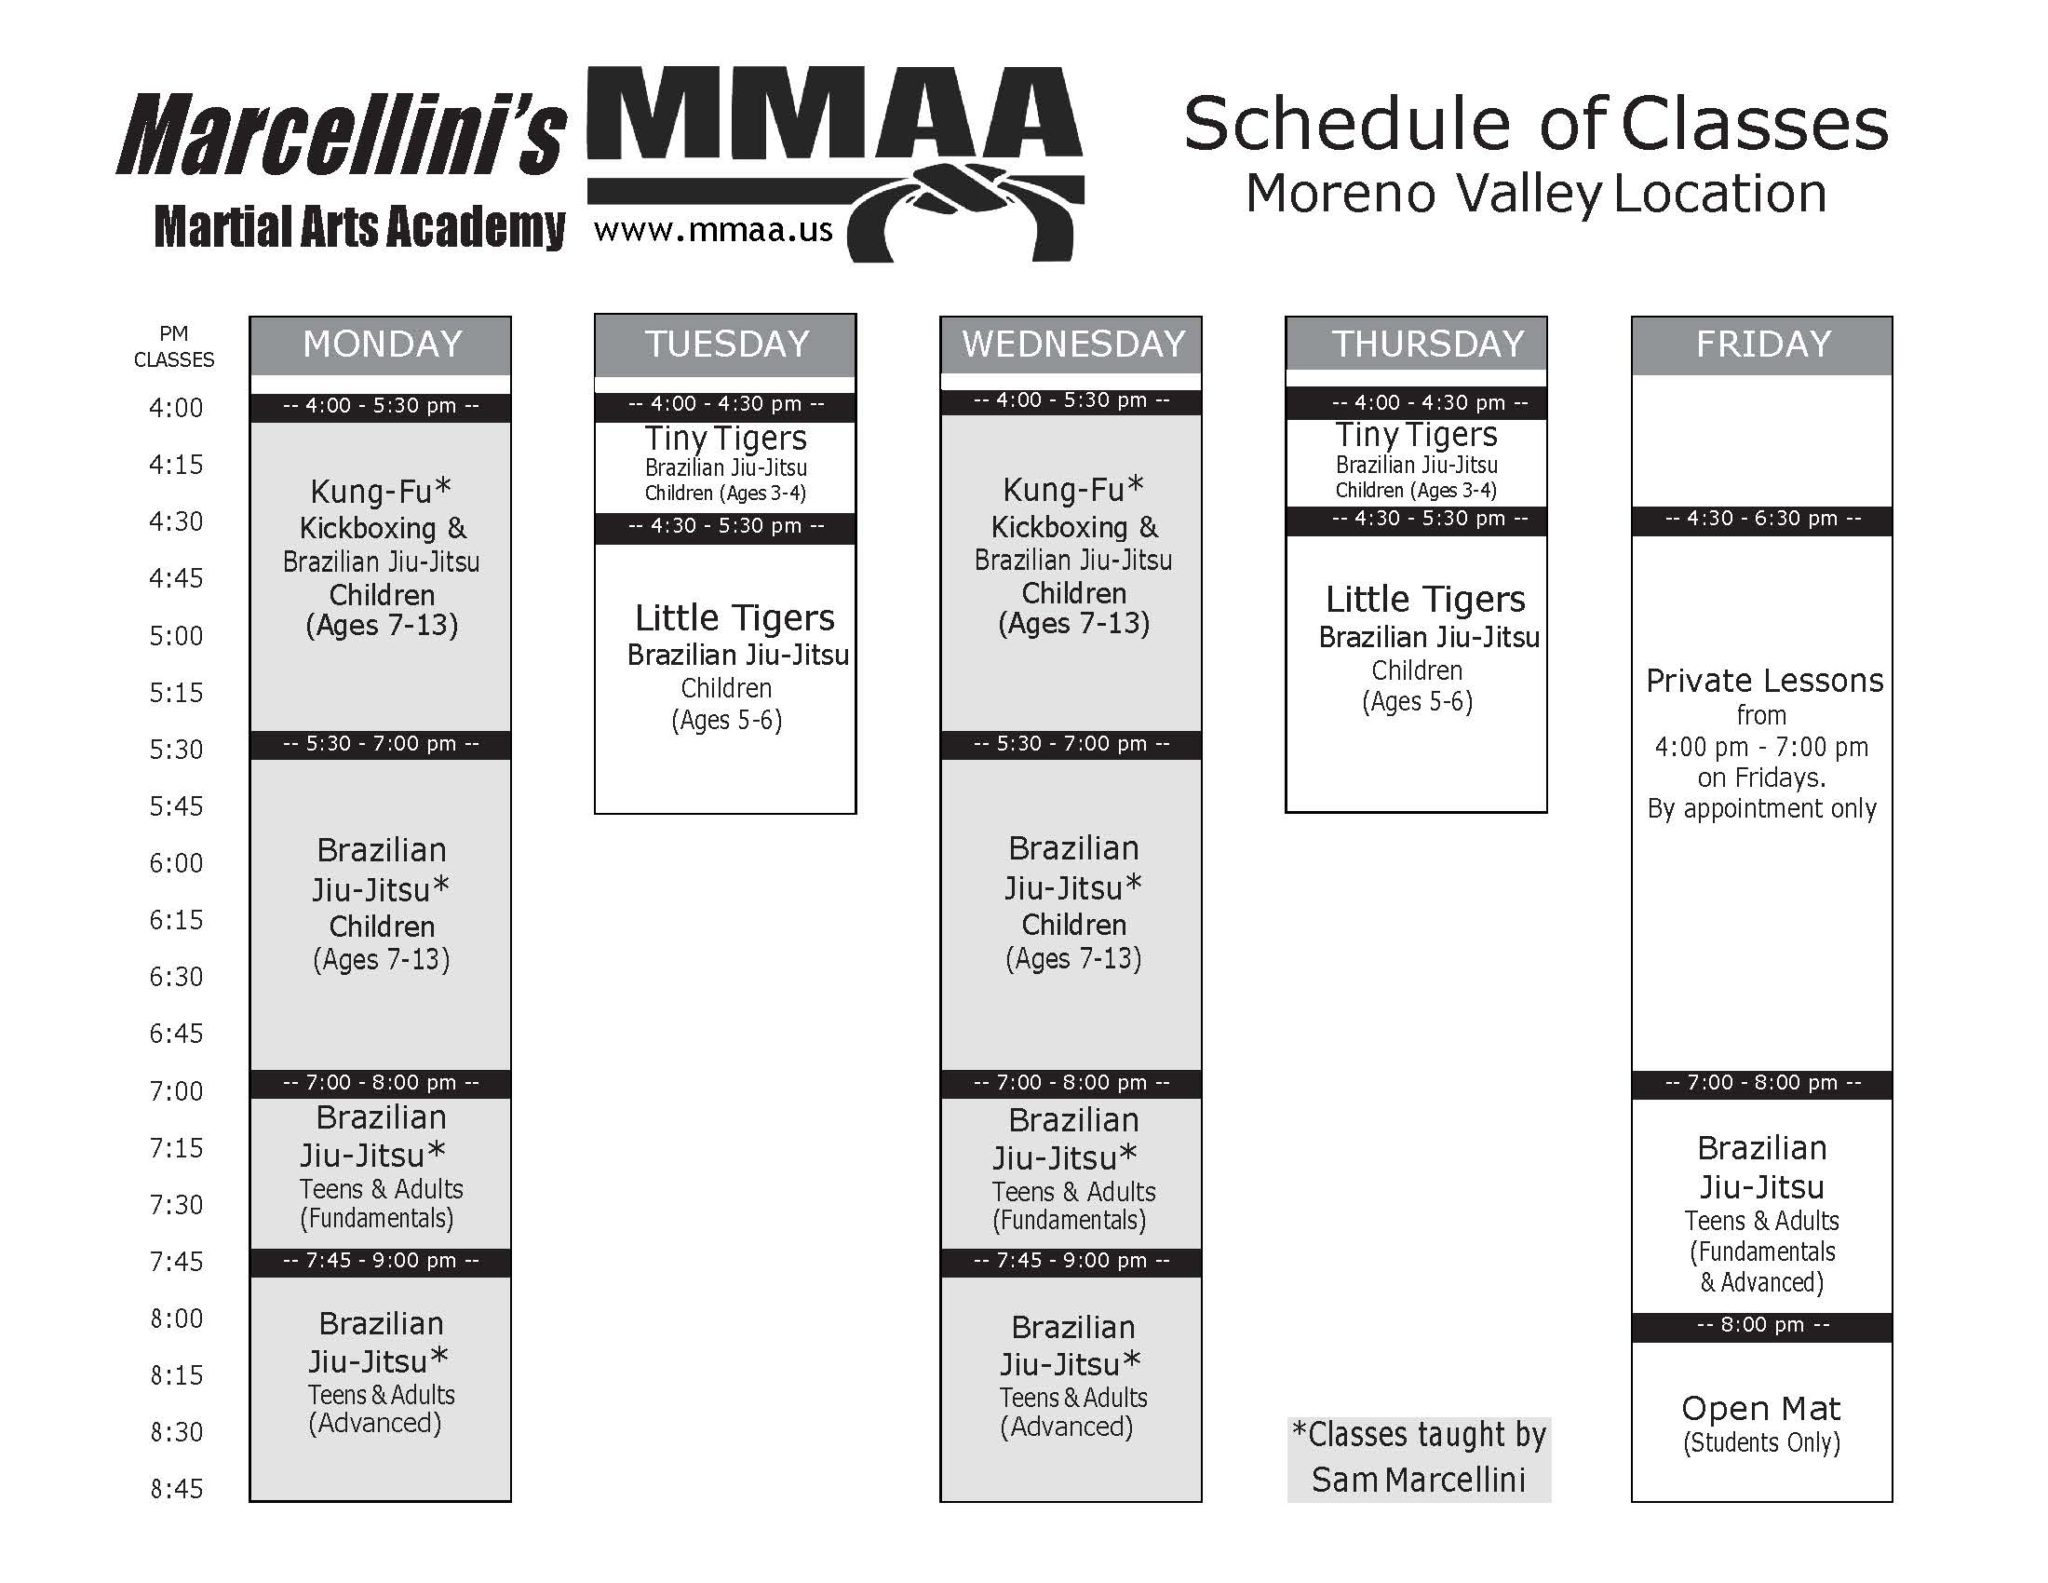 Schedule-Beverly Hills - Marcellini's Martial Arts